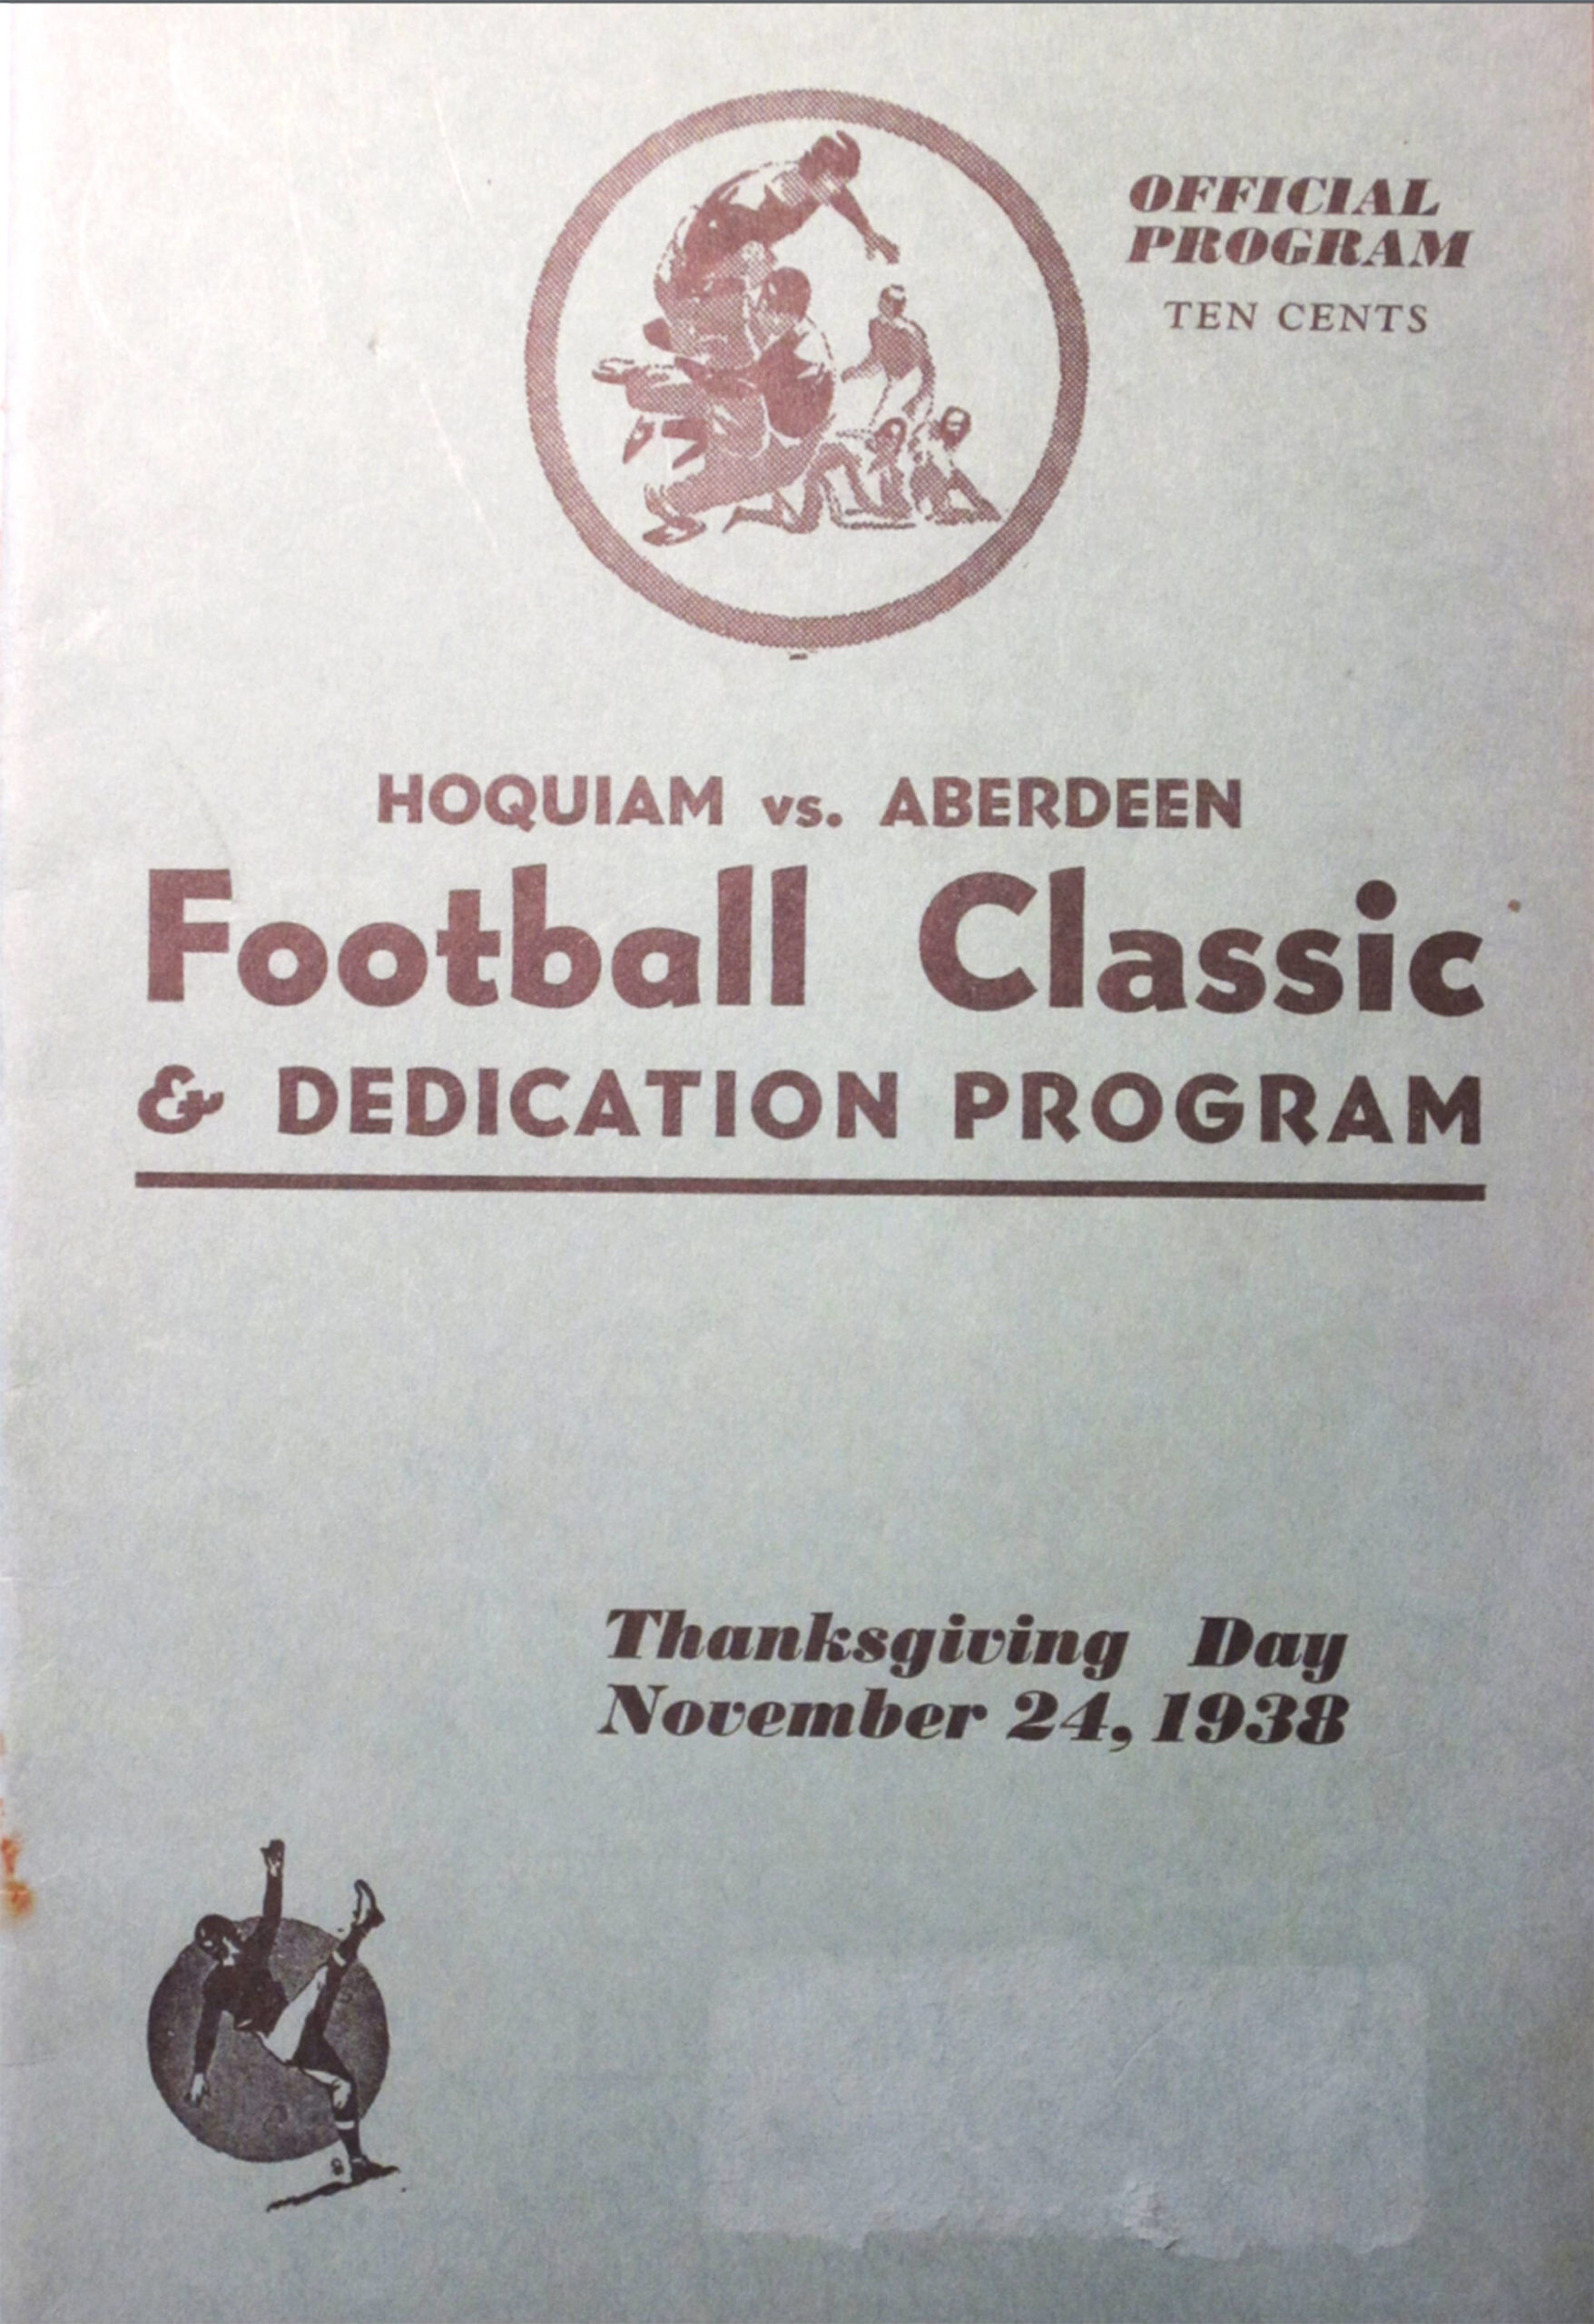 The Hoquiam vs. Aberdeen Football Classic, played on Nov. 24, 1938 served as the point in time when the athletic field at Olympic Stadium was dedicated. The 83-year-old stadium survived a close call after suspected arson caused multiple fires on walkways in the south and west bleachers. (Provided photo)